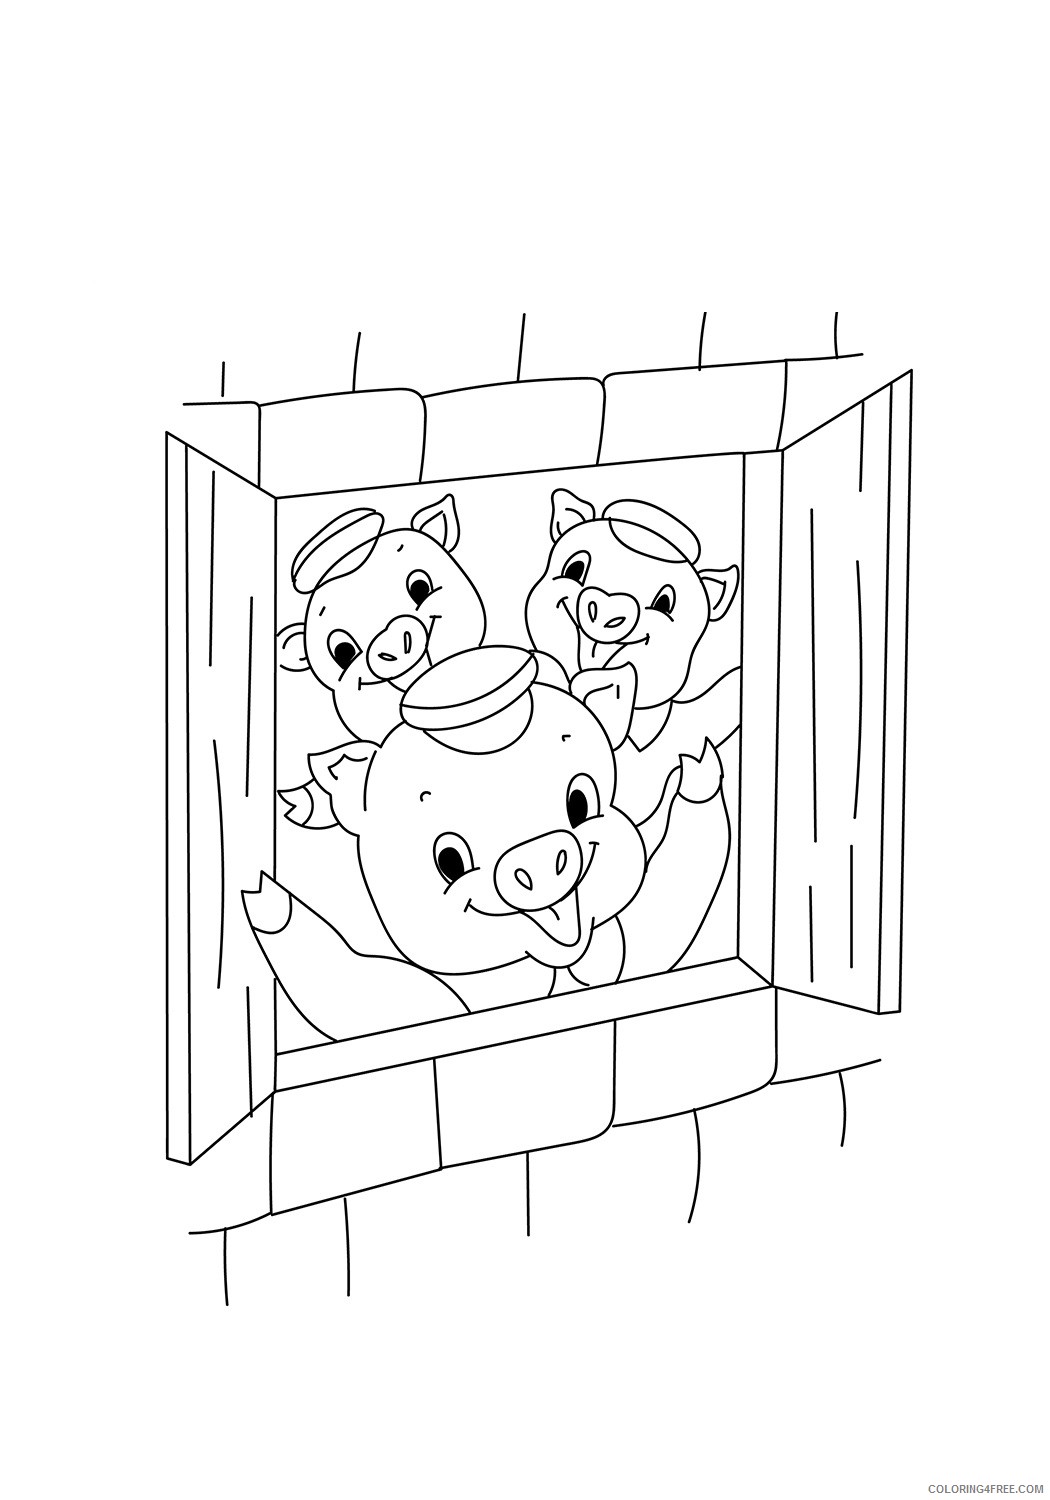 Three Little Pigs Coloring Pages Cartoons 1526907129_the three little pigs 17 a4 Printable 2020 6566 Coloring4free